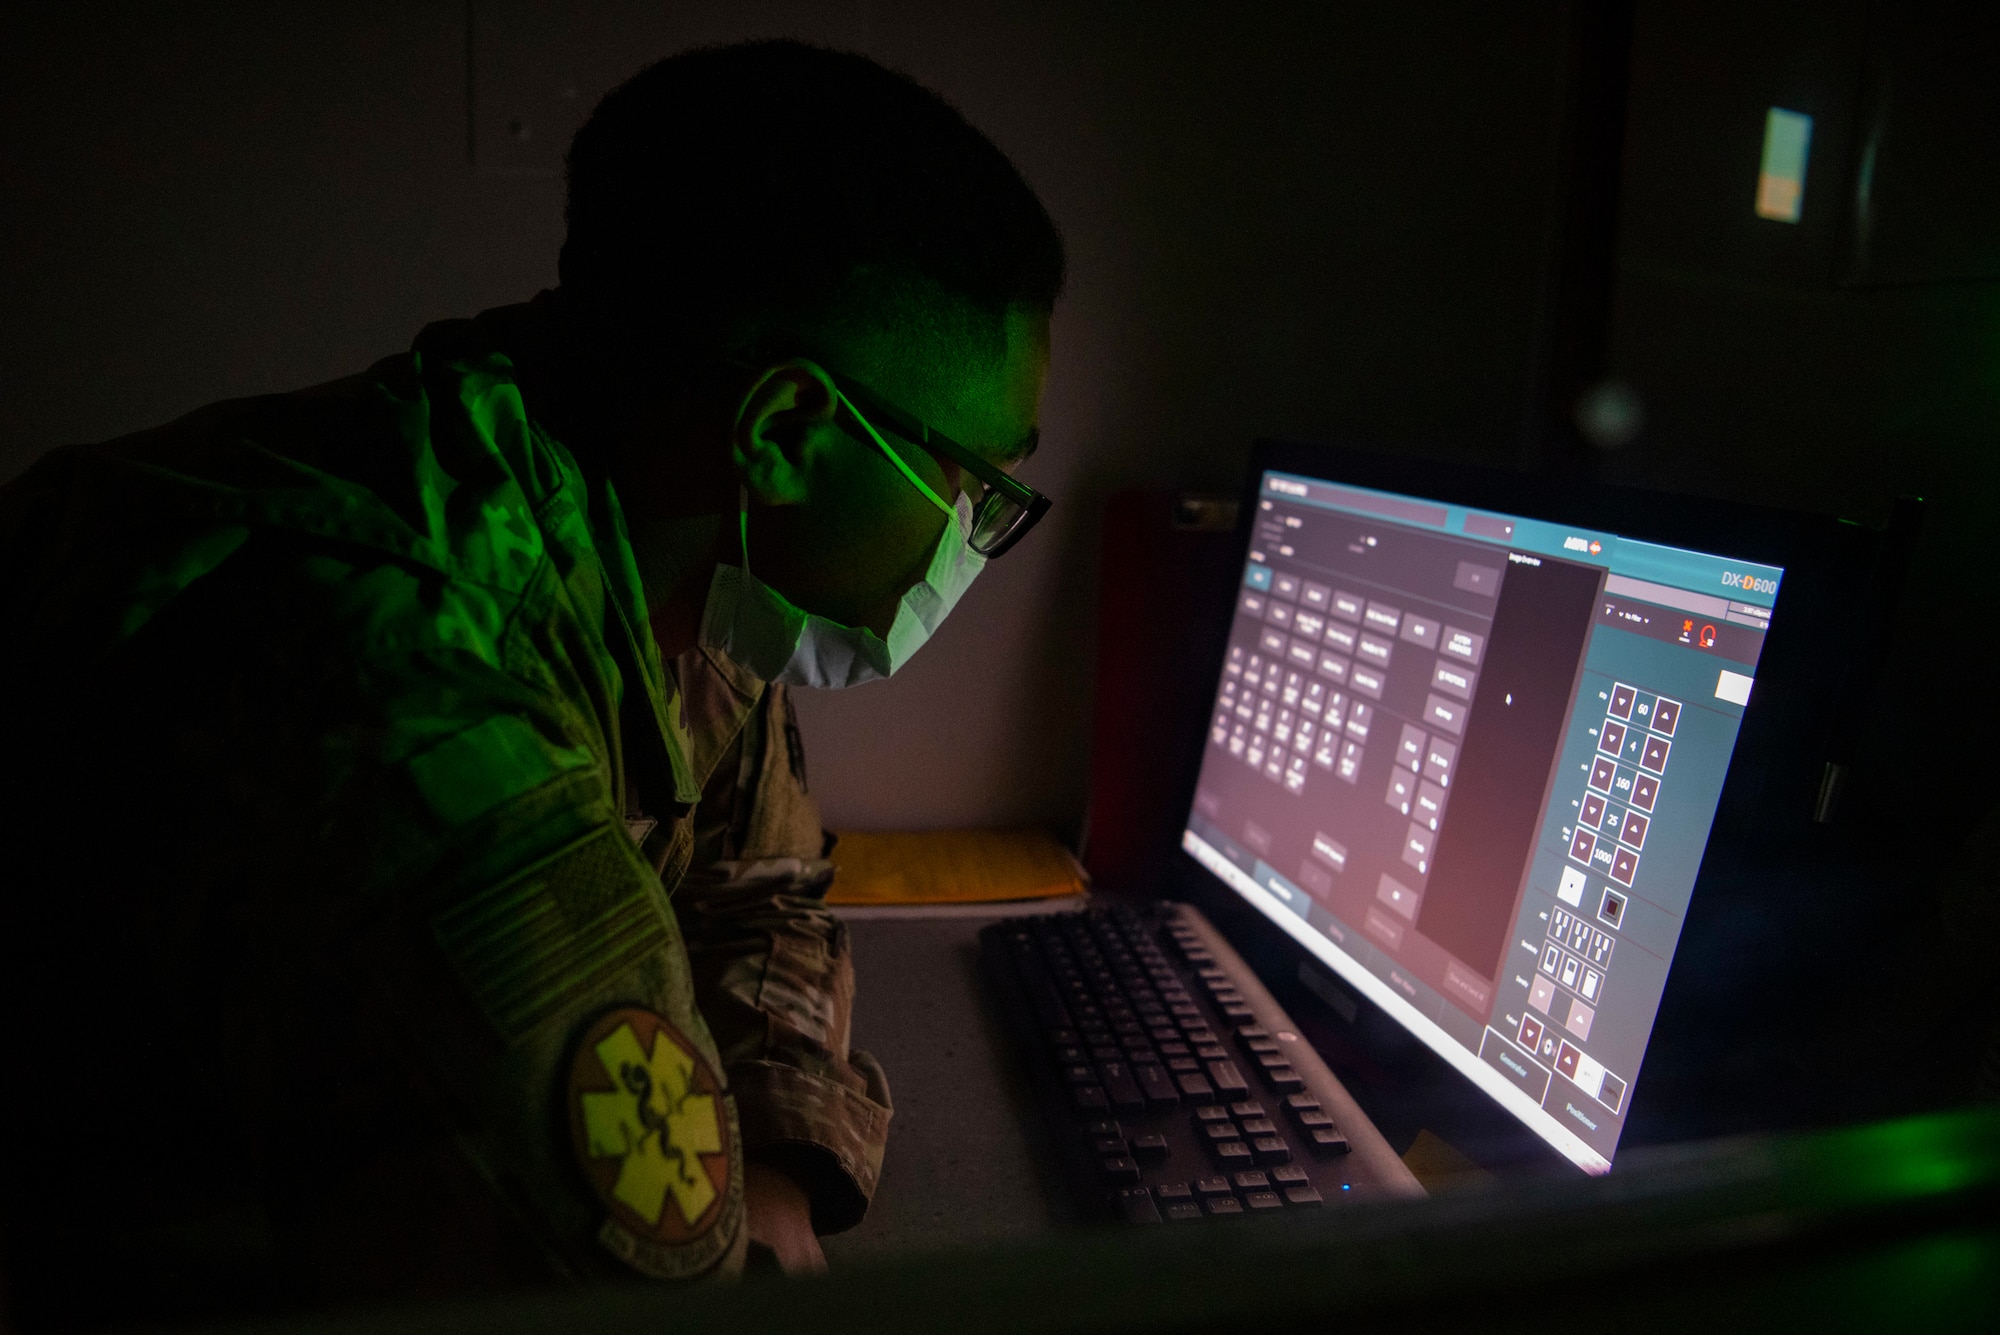 U.S. Air Force Staff Sgt. Edward Smith, 7th Health Care Operations Squadron diagnostic imaging technologist, reviews a program during an X-ray machine demonstration at Dyess Air Force Base, Texas, Feb. 8, 2023. The Dyess Radiology Clinic ensures military personnel and their families receive quality health care by taking X-ray images that are digitally transmitted through the picture archiving and communication system to be read by a radiologist at Travis AFB, California. (U.S. Air Force photo by Airman 1st Class Ryan Hayman)